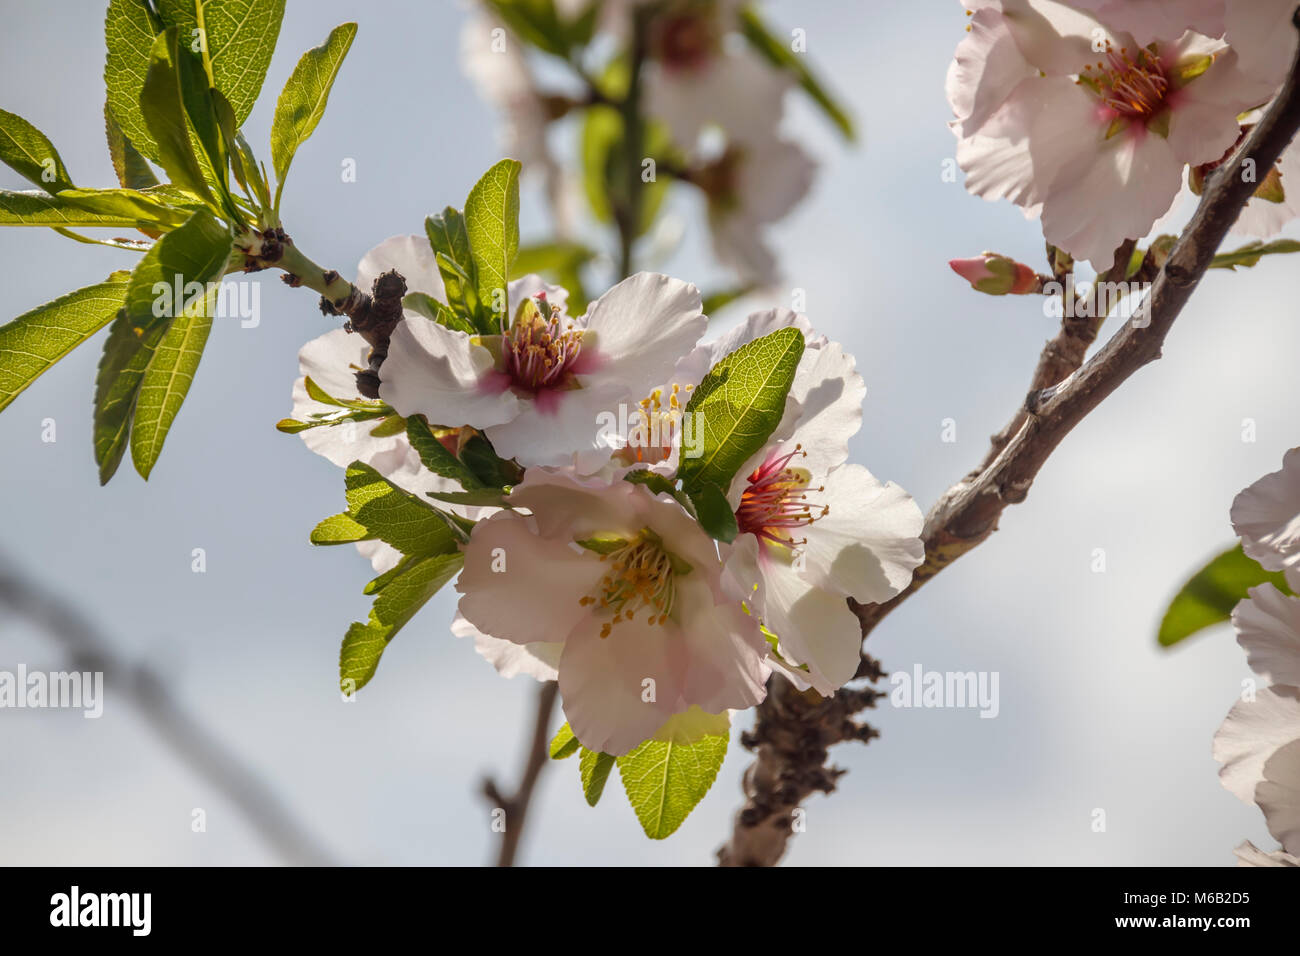 Leaves and flowers of the almond tree in the counter light Stock Photo